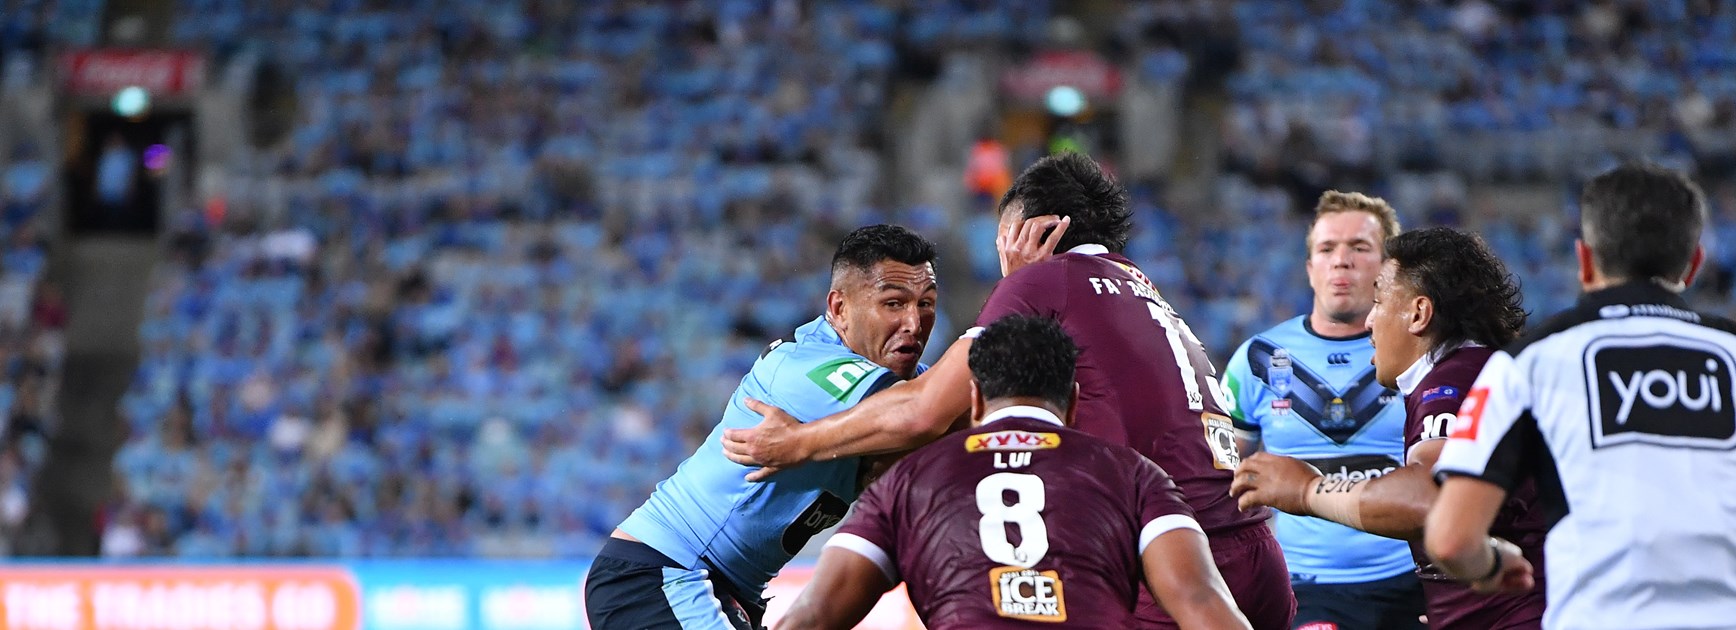 Blue sensation: Cleary shines in Maroons mauling to force decider